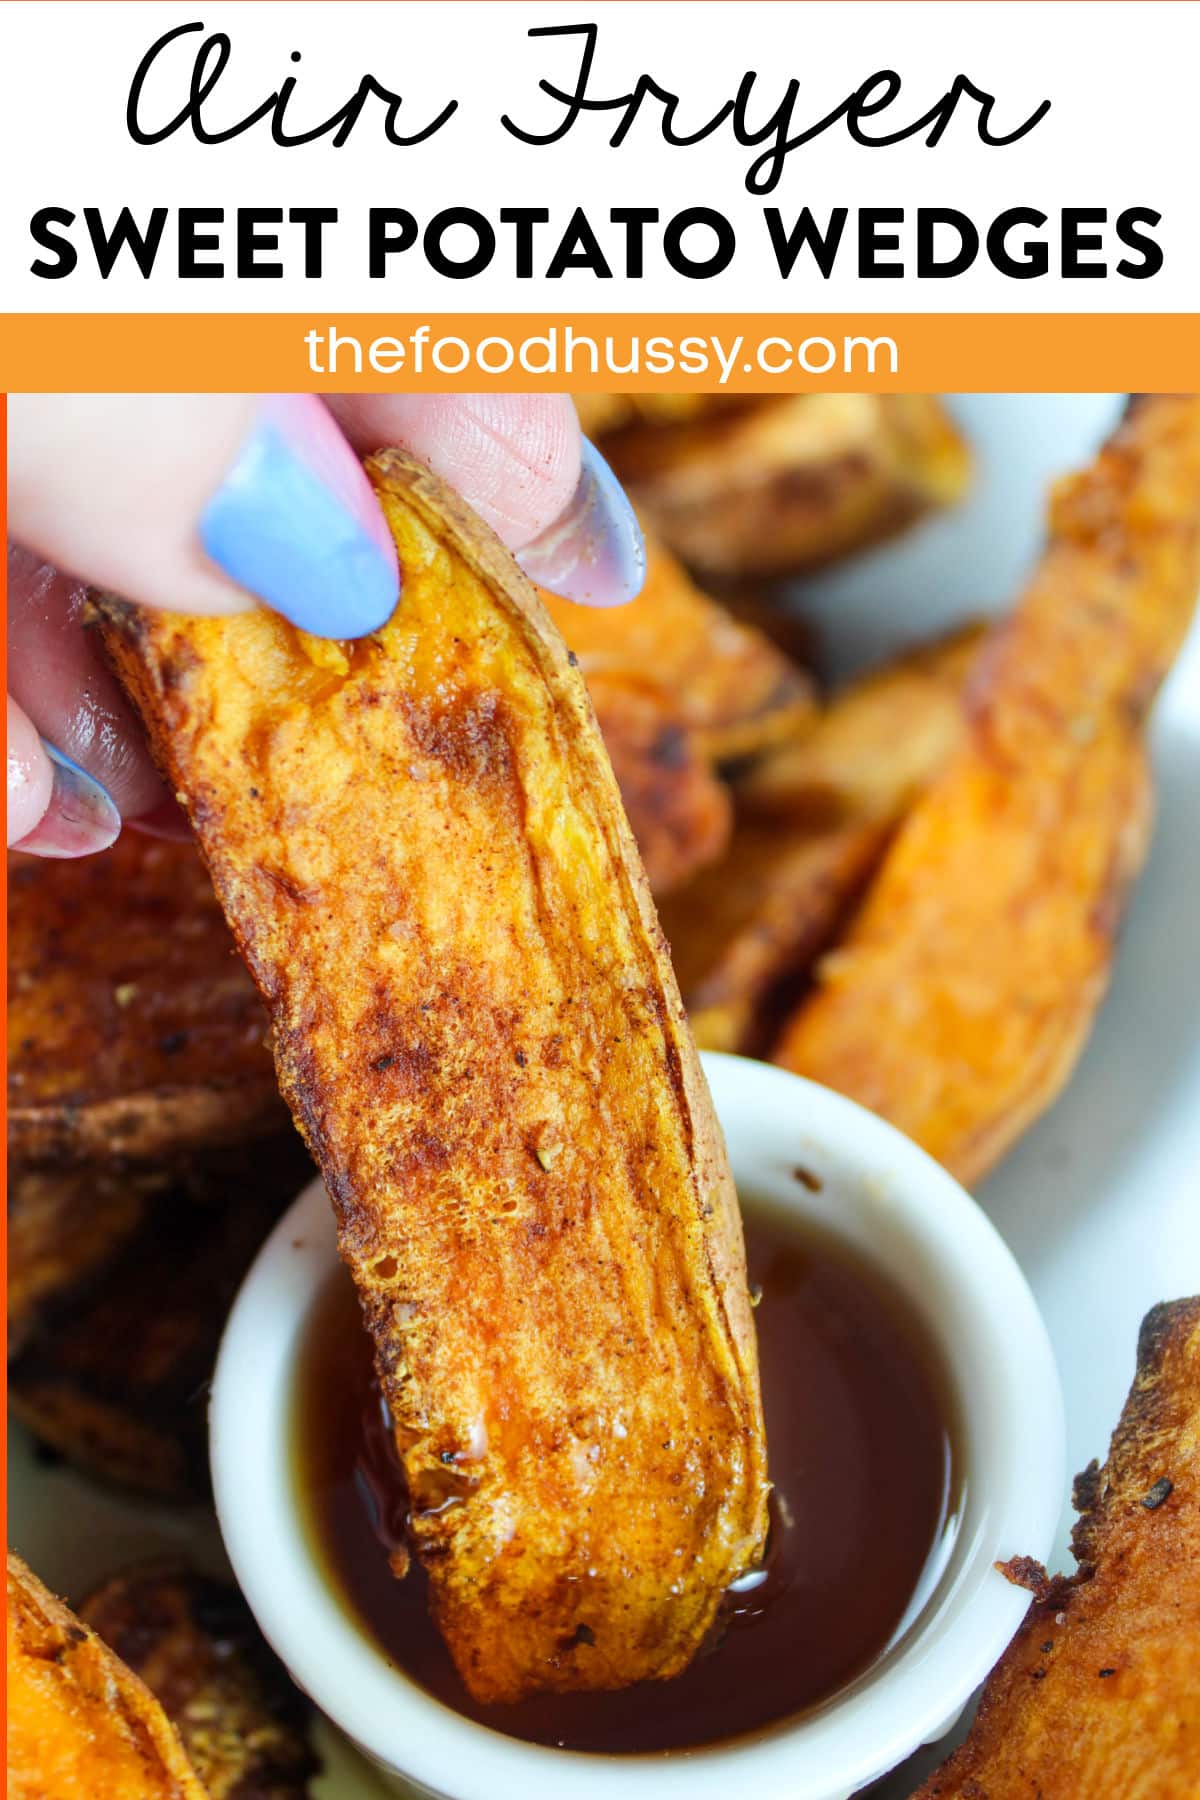 Air Fryer Sweet Potato Wedges are the perfect side dish for burgers, chicken or pork chops! They are crisp on the outside and fluffy on the inside with a comforting cinnamon spice mixture! via @foodhussy